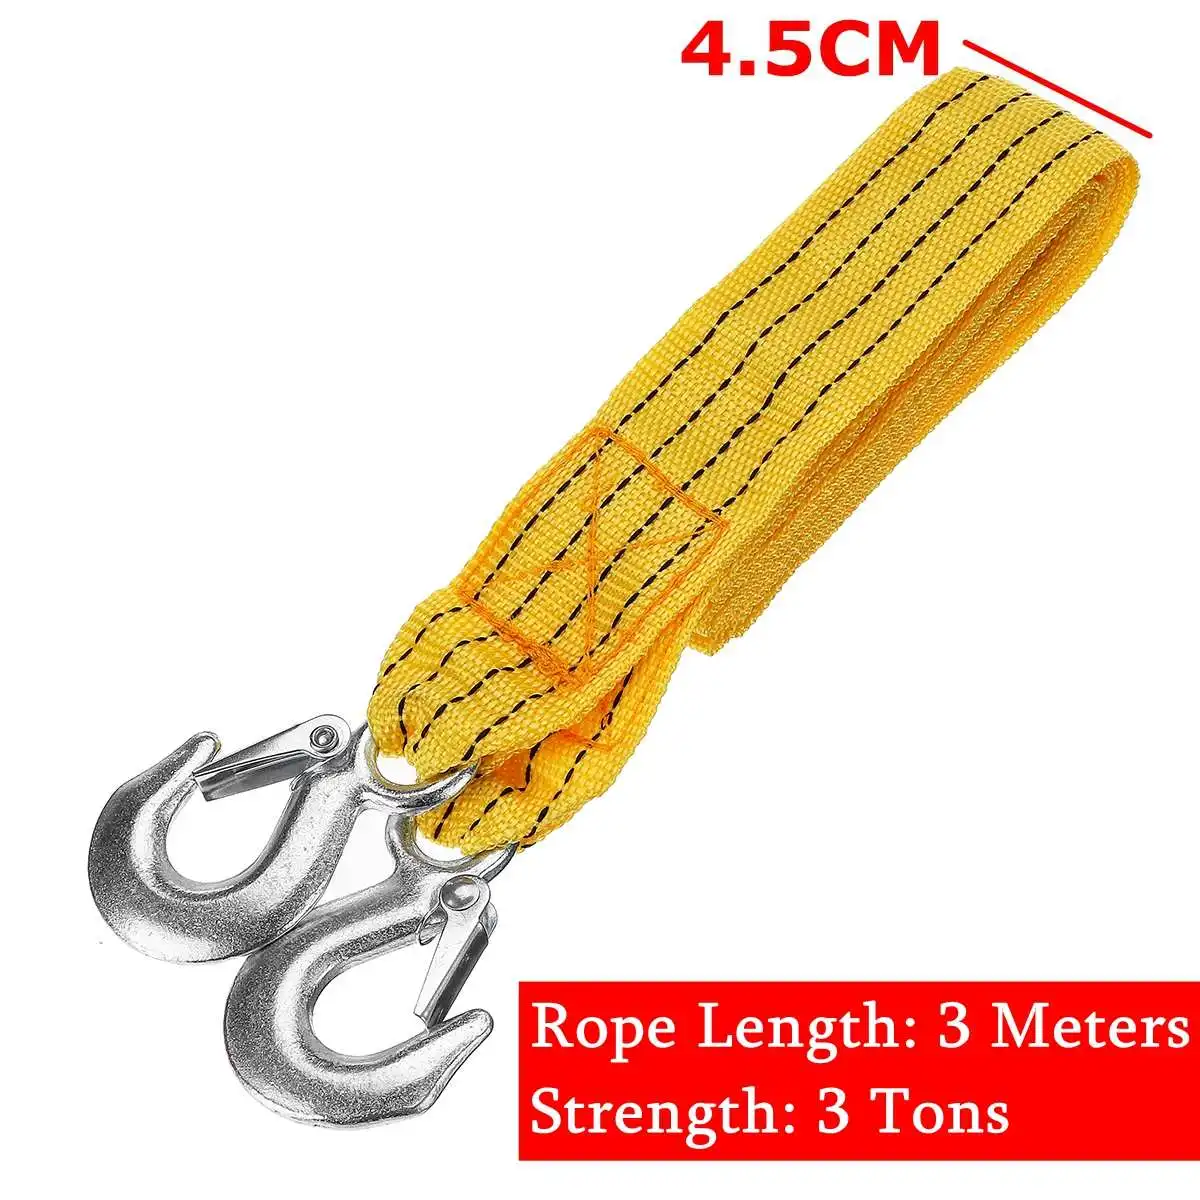 15FT Tow Towing Pull Rope Strap Heavy Duty 5 Ton Suitable for Kia Sorento Carens